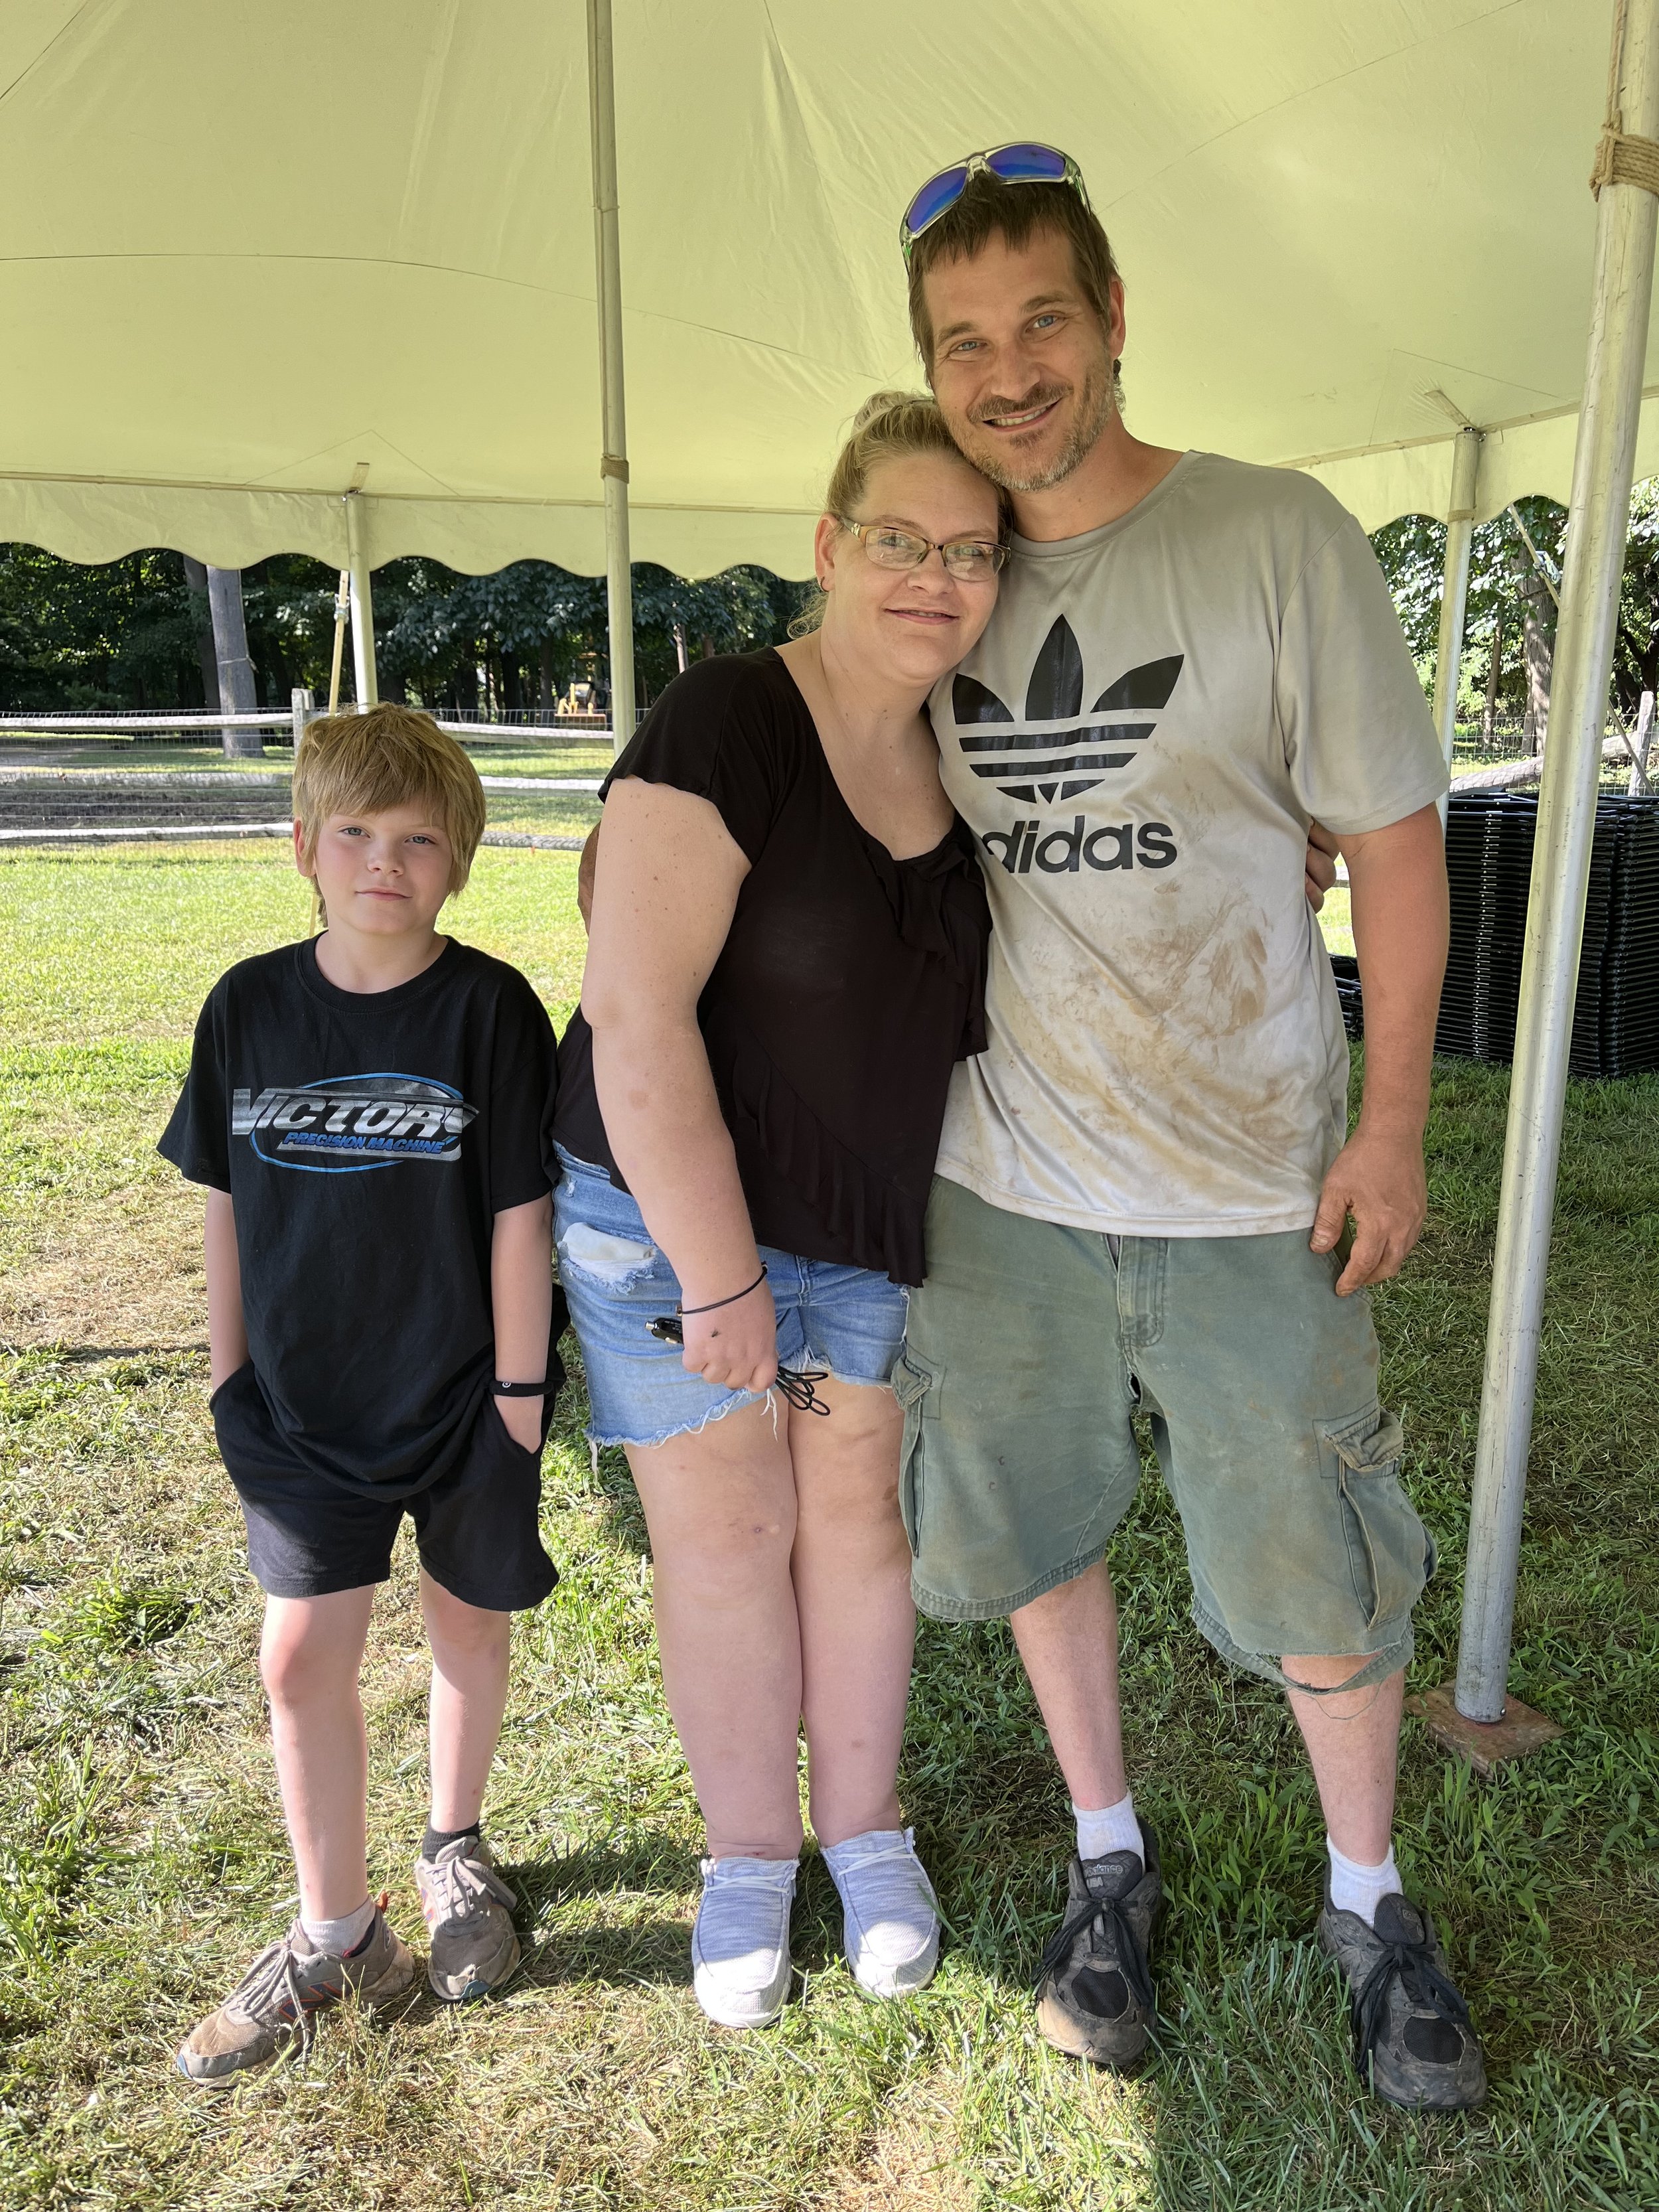 Travis Jr. Wyant, Kim Lewis, and Travis Wyant - "The Brick Diggers" came from Lonaconing, MD. Travis Sr. has been metal detecting for five years; bottle hunting for ten. 